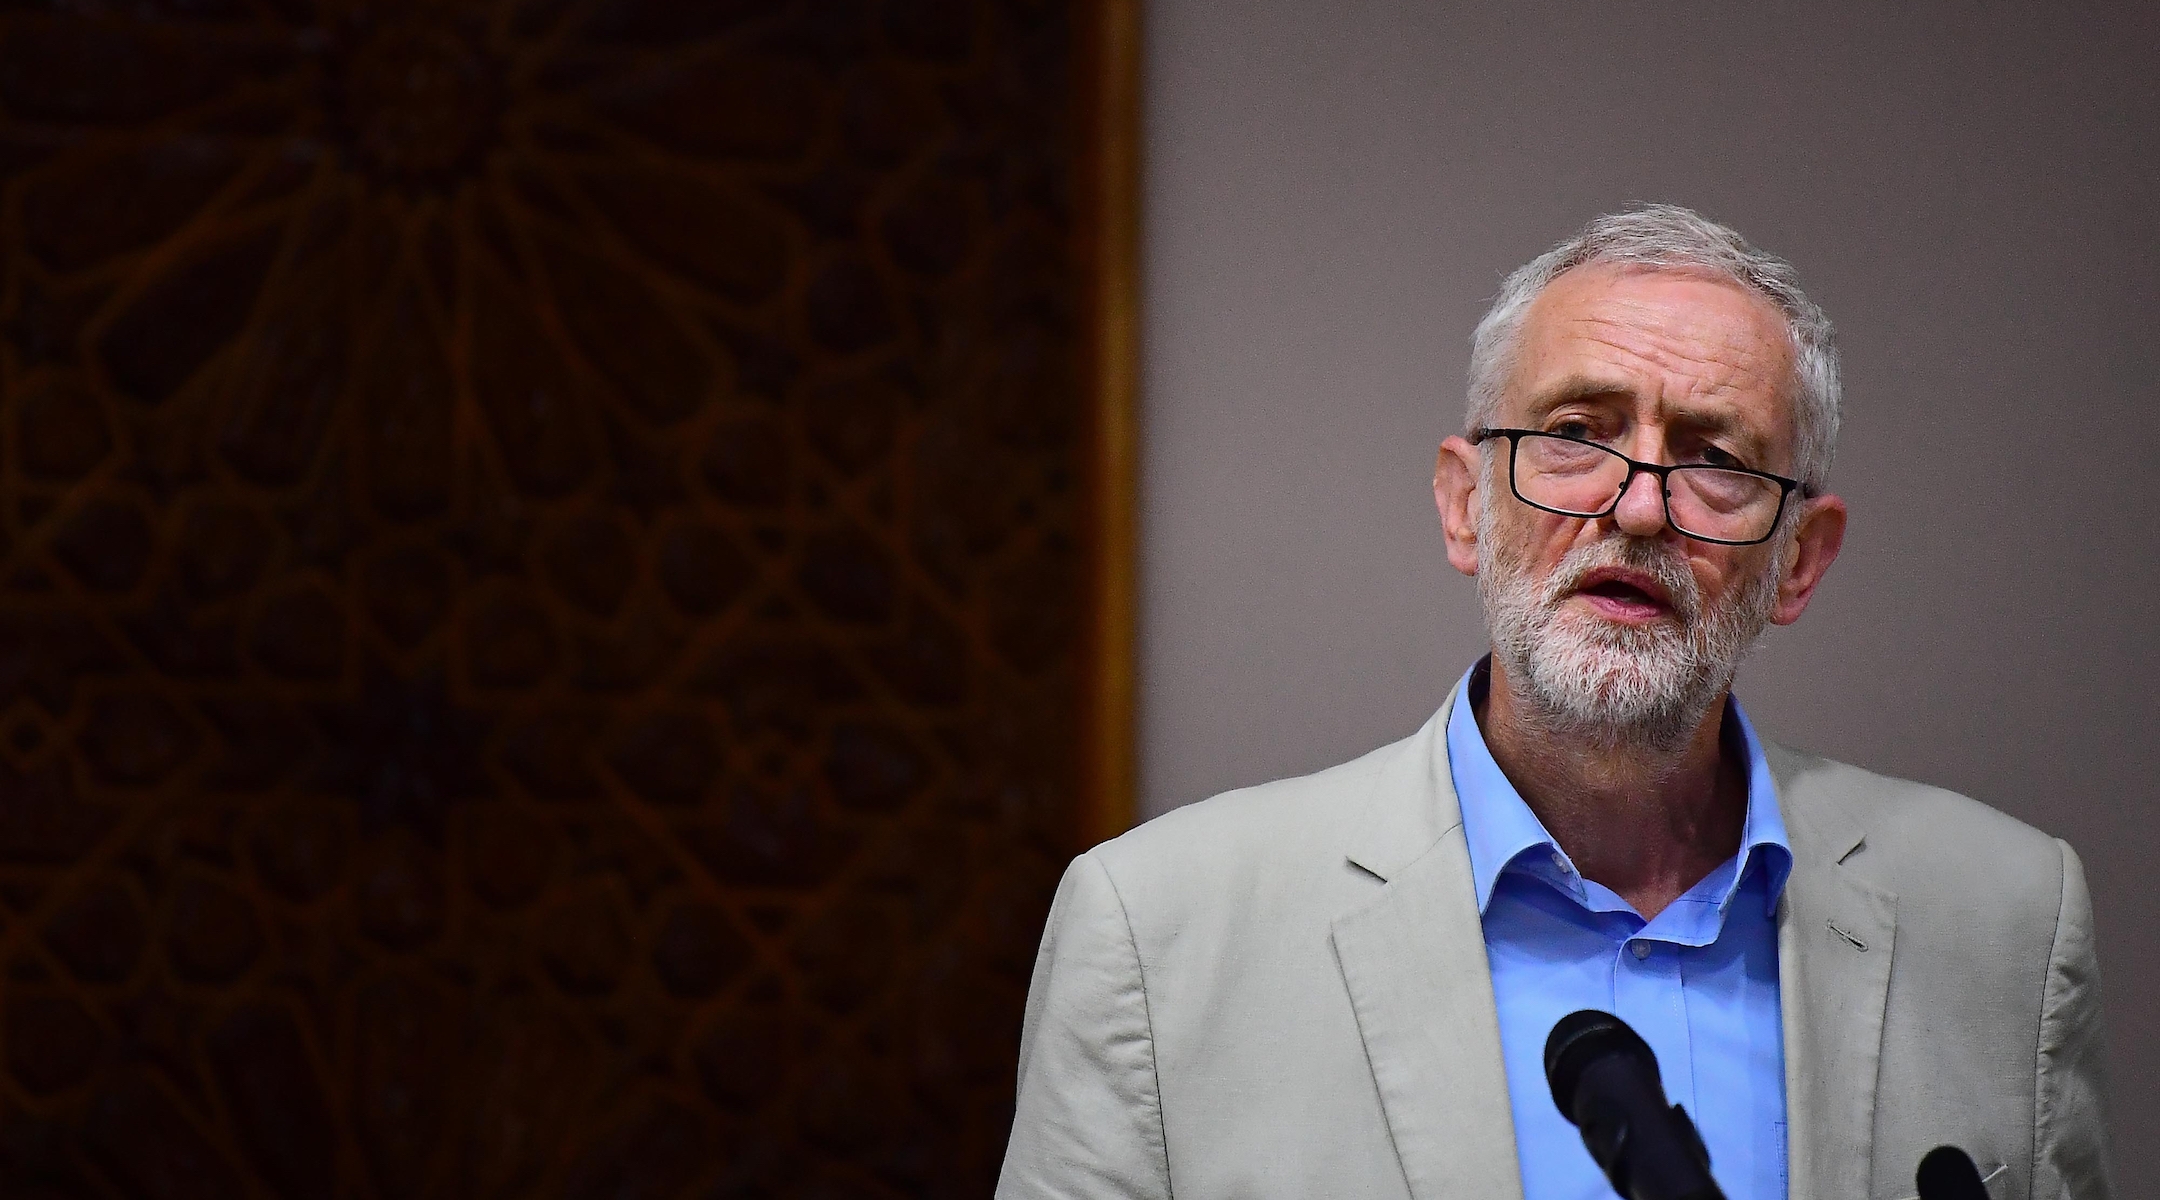 Labour former leader Jeremy Corbyn, show speaking at a London mosque in May 2019, wrote an email to party members saying anti-Semitism must be driven out of the movement. (Victoria Jones/PA Images via Getty Images)